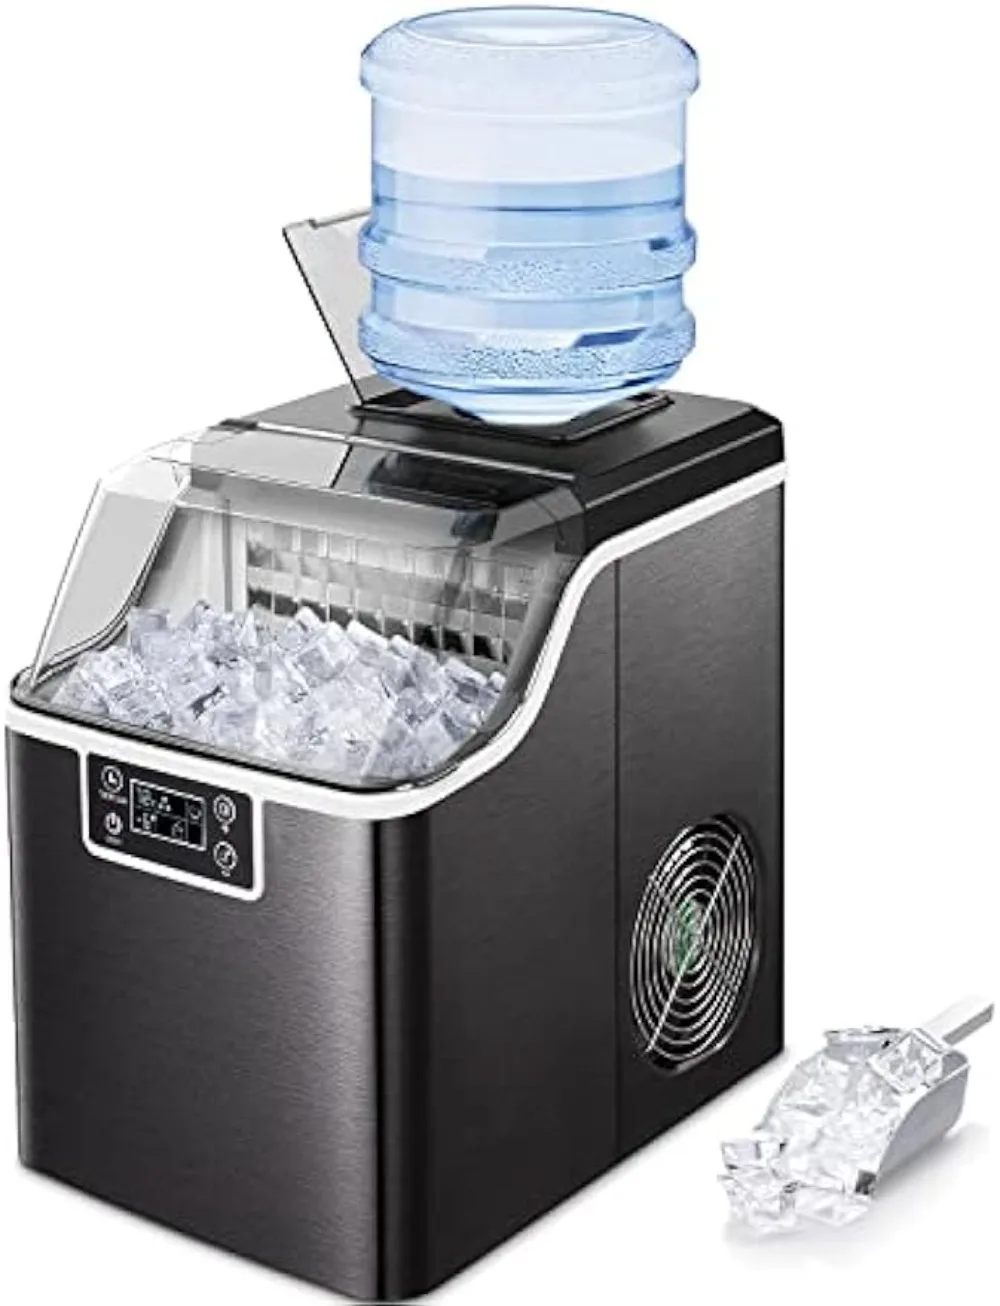 

Kndko Ice Makers Countertop,2,000 pcs/45 lbs/Day,2 Way Filling,Self-Cleaning,6 Gears Ice Size Control,24H Timer,ice Machine Make